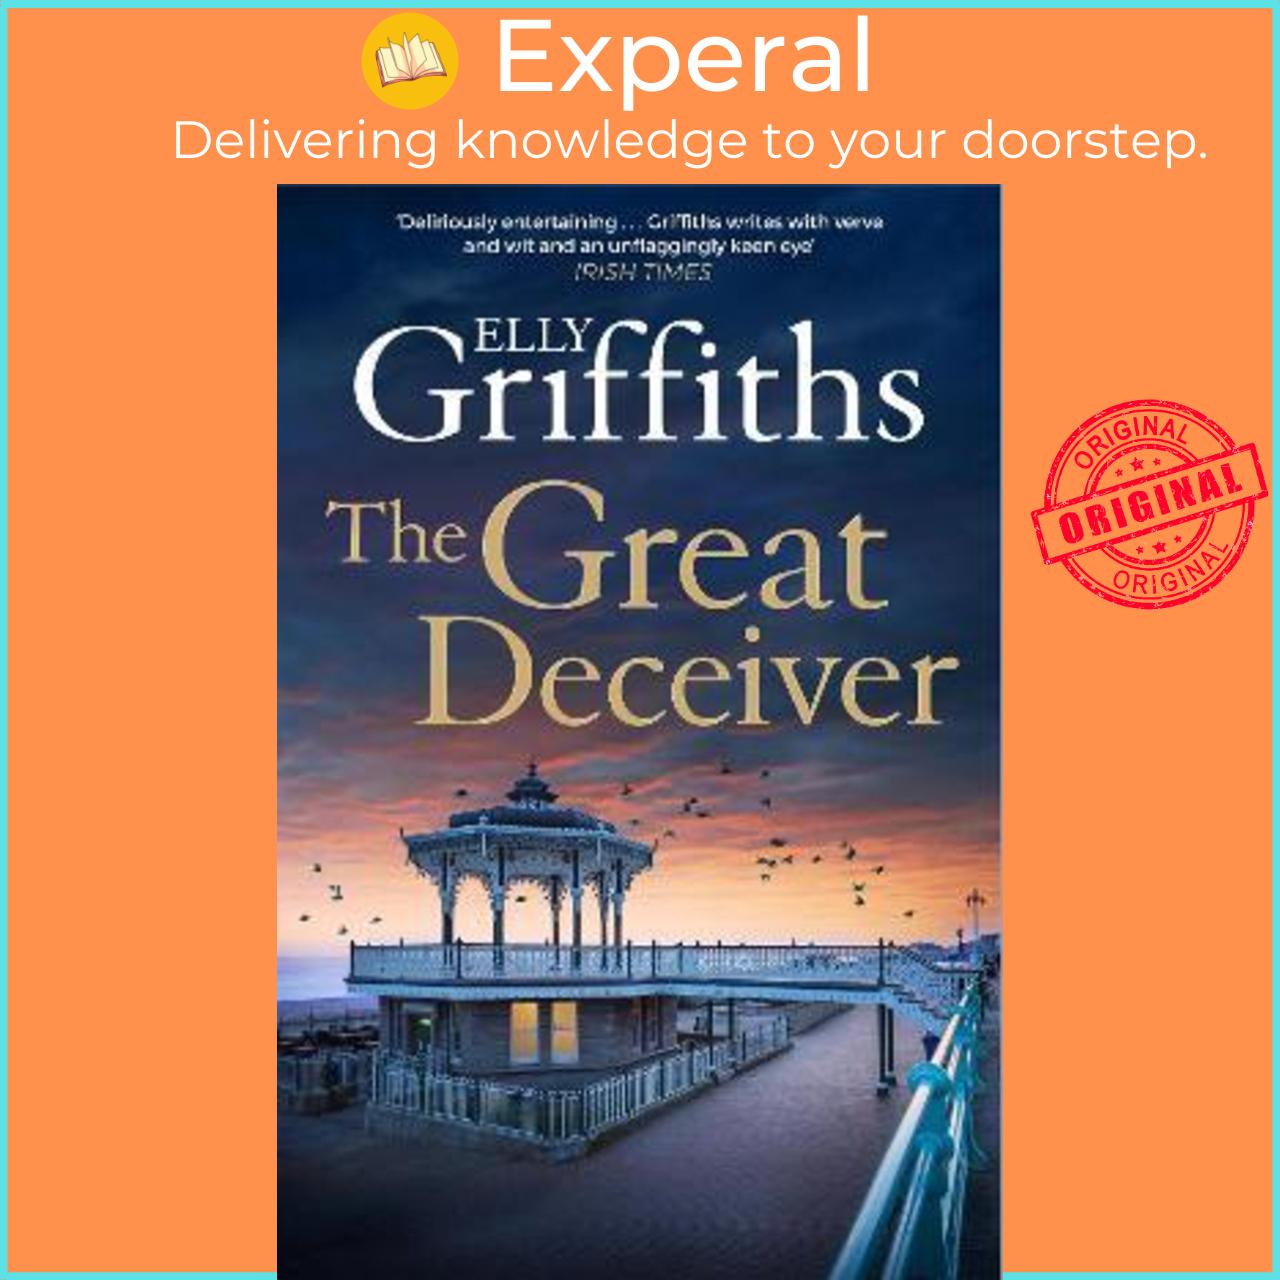 Sách - The Great Deceiver : The gripping new novel from the bestselling author by Elly Griffiths (UK edition, hardcover)